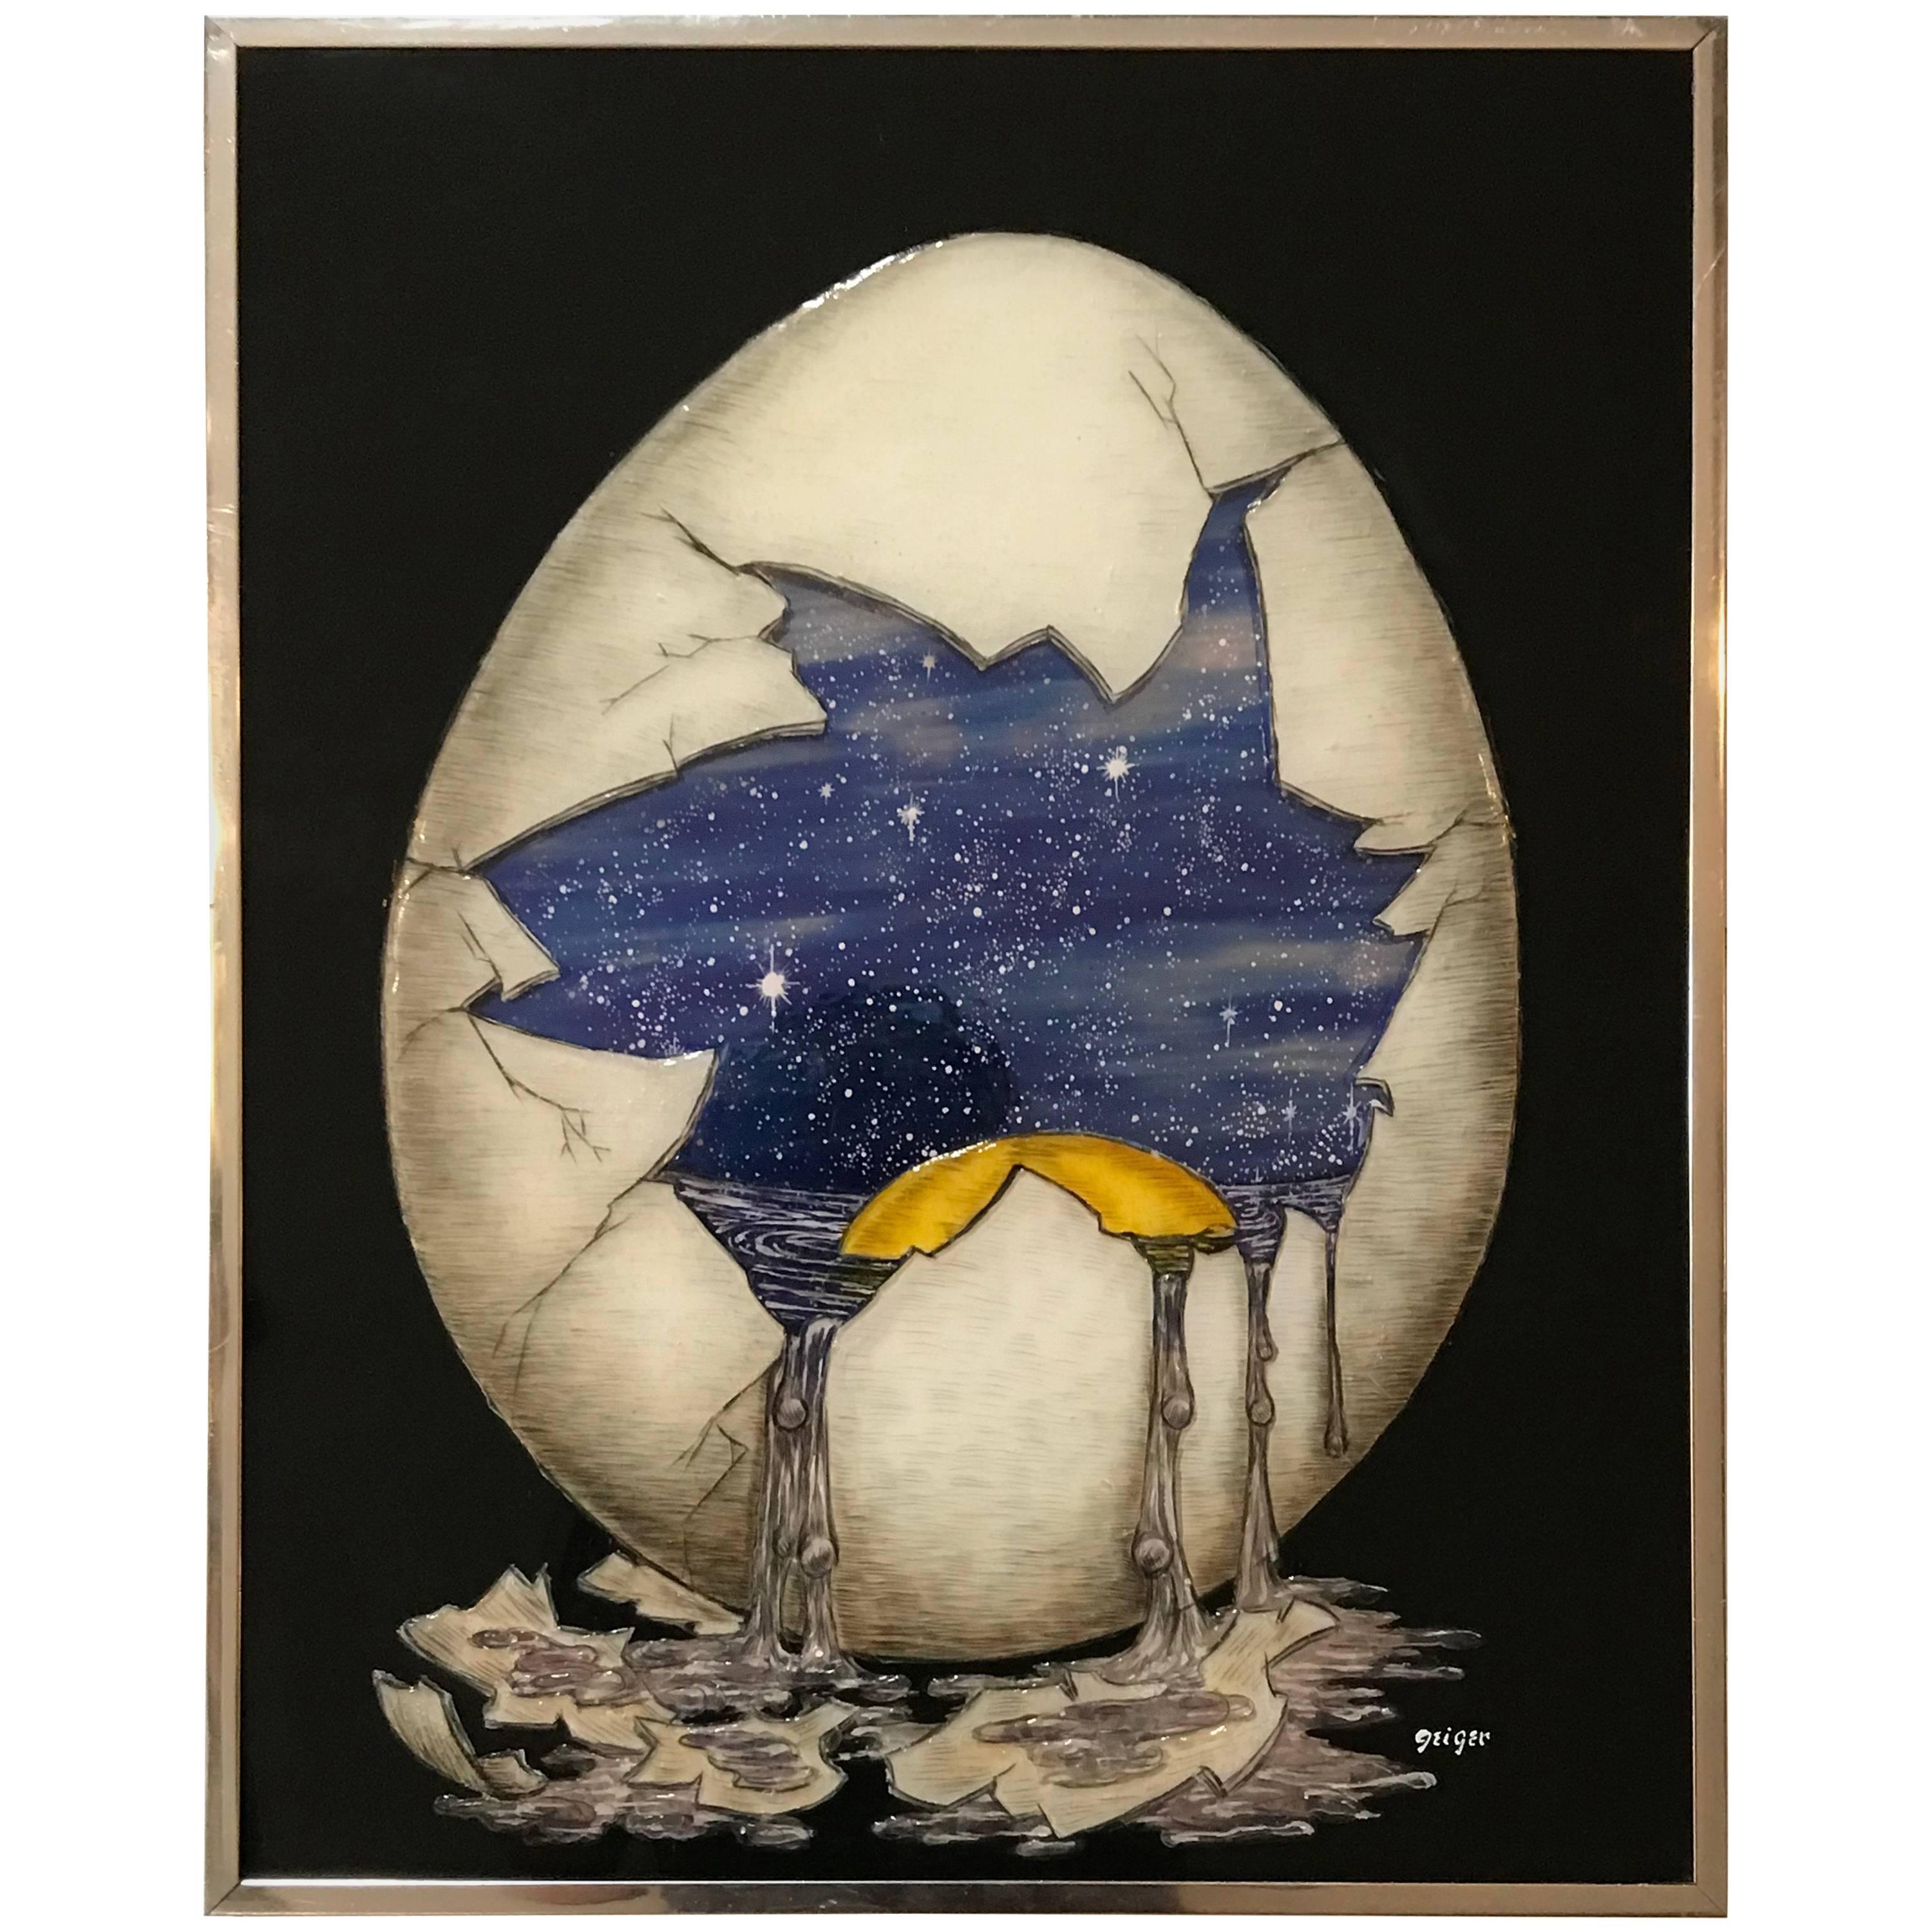 Dimensional Artwork of an Egg Holding a Universe by Geiger